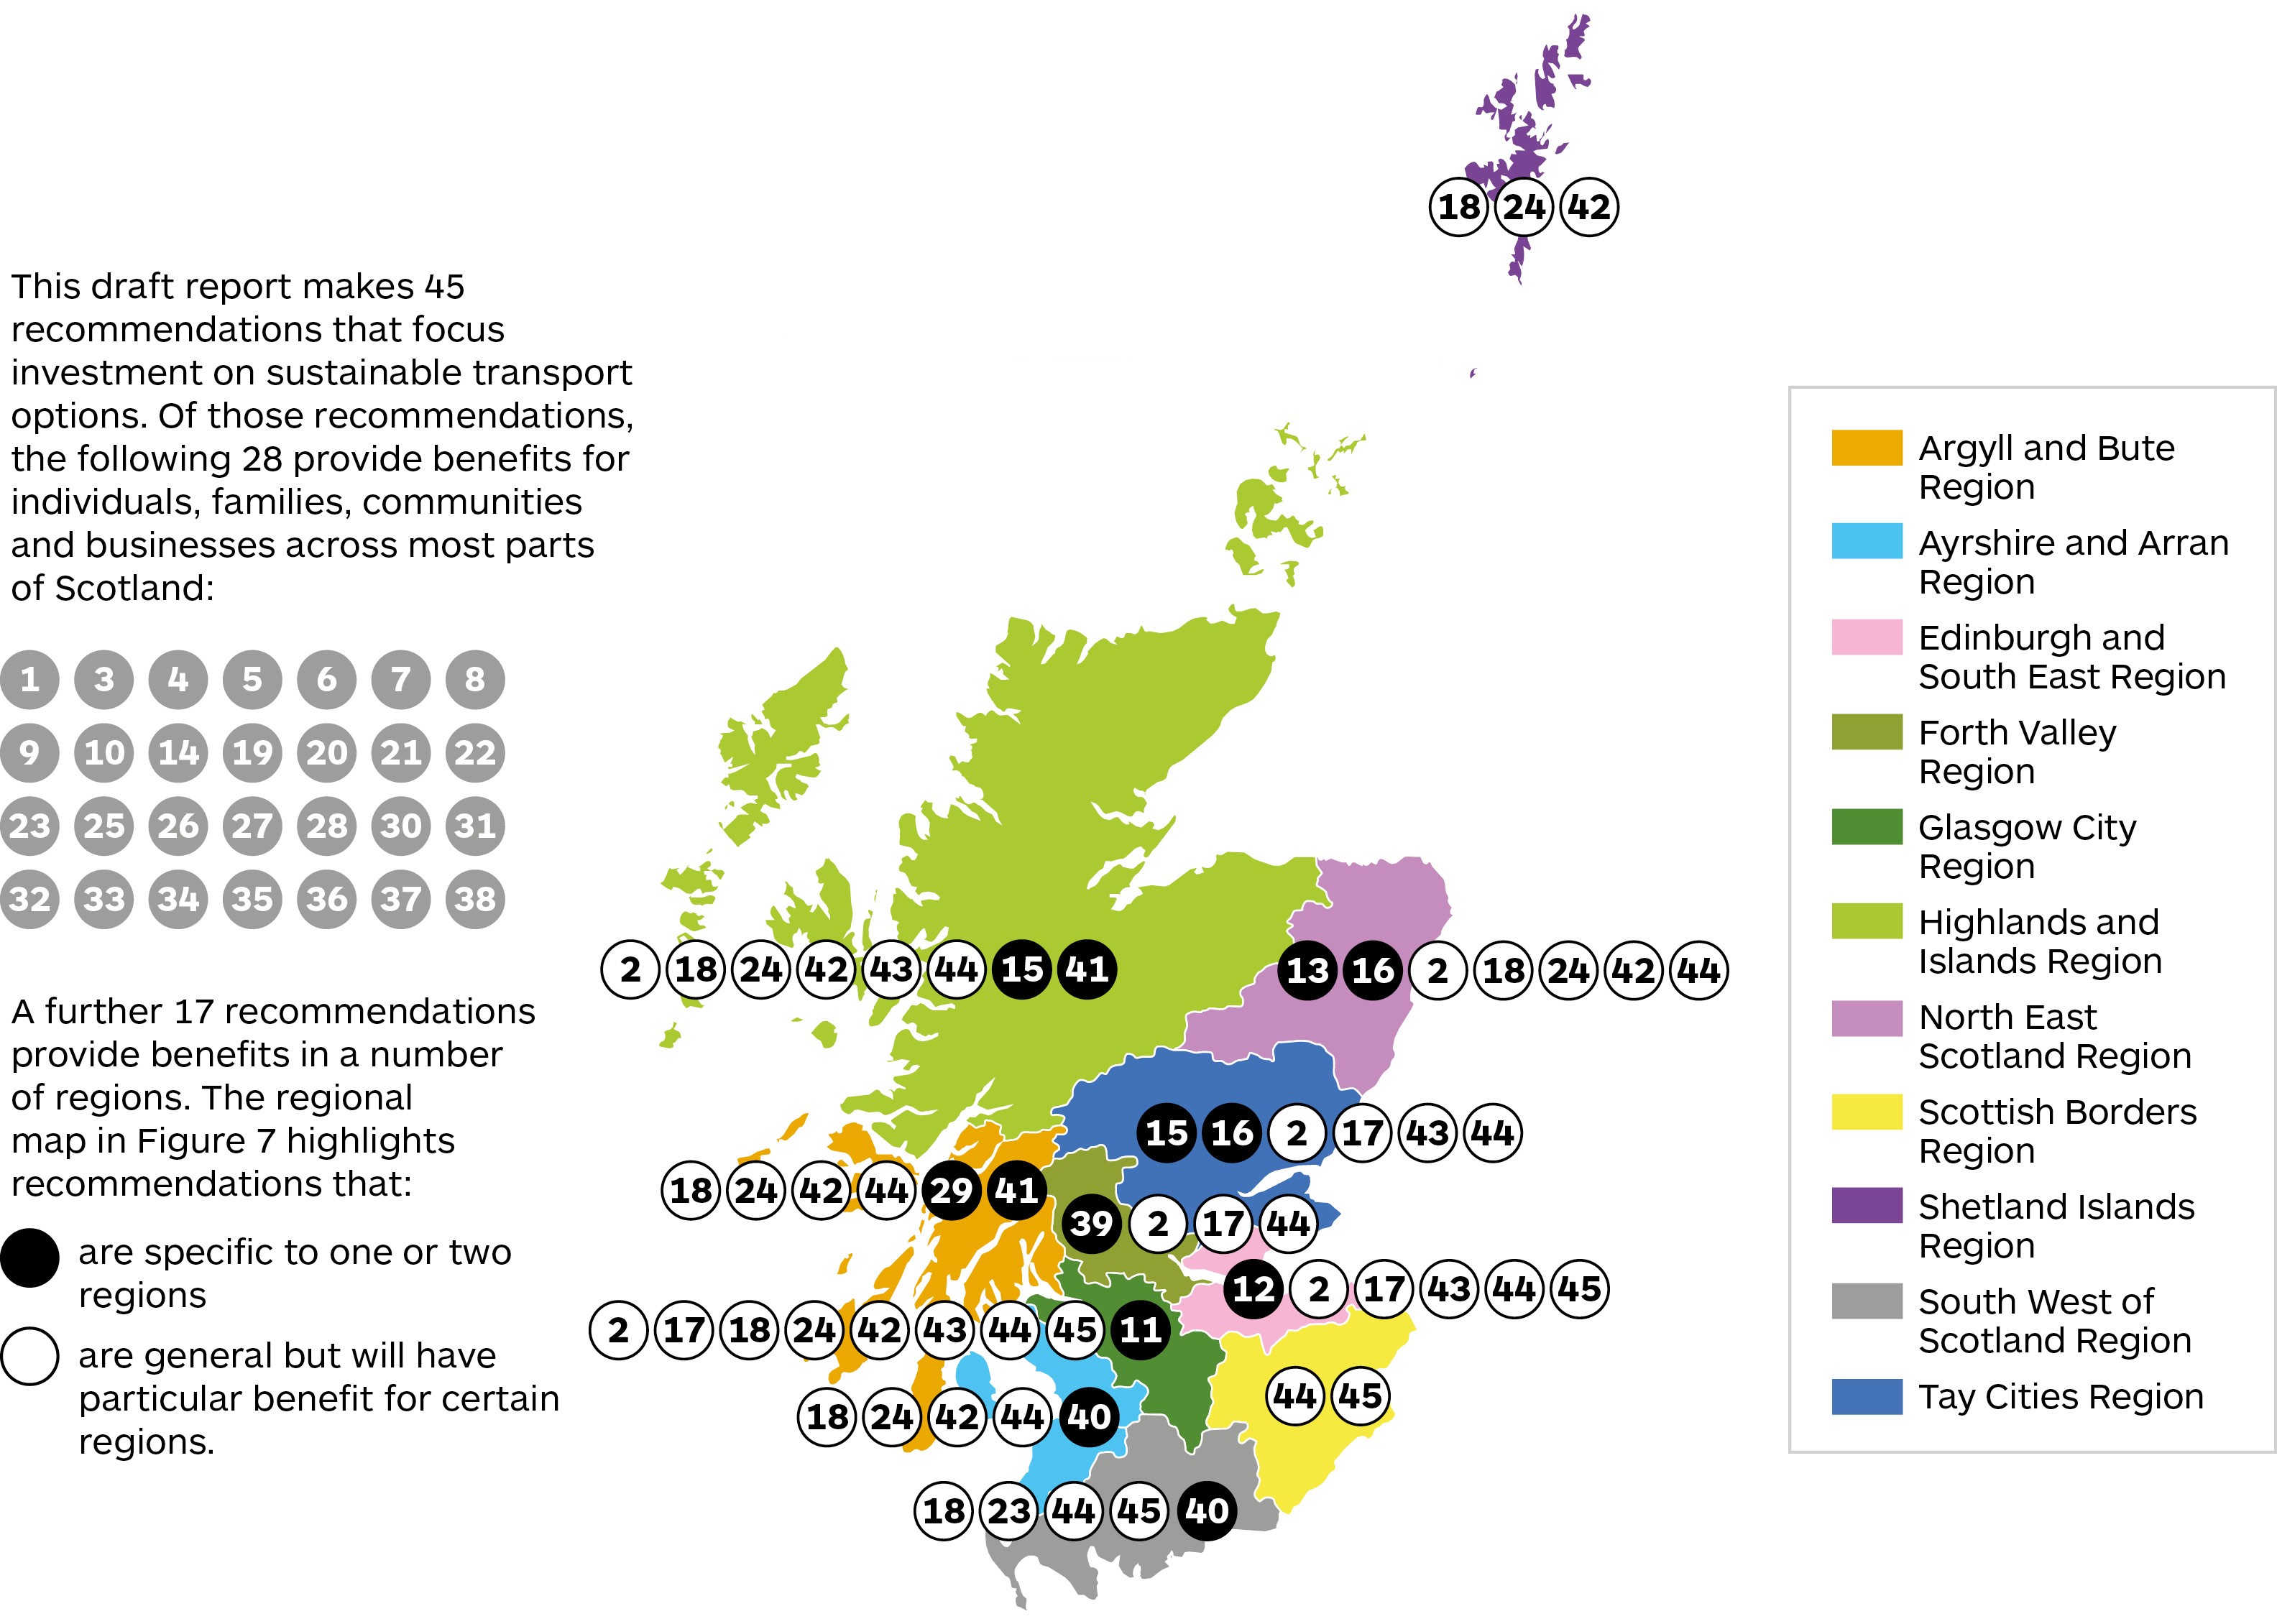 A map of Scotland highlighting the 11 STPR2 regions and listing the recommendations that are specific to or will have particular benefit for each region.
	For Argyll and Bute region recommendations 29 and 41 are specific and recommendations 18, 24, 42 and 44 will have particular benefit.
	For Ayrshire and Arran region recommendation 40 is specific and recommendations 18, 24, 42 and 44 will have particular benefit.
	For Edinburgh and South East region recommendation 12 is specific and recommendations 2, 17, 43, 44 and 45 will have particular benefit.
	For Forth Valley region recommendation 39 is specific and recommendations 2, 17 and 44 will have particular benefit.
	For Glasgow City Region recommendation 11 is specific and recommendations 2, 17, 18, 24, 42, 43, 44 and 45 will have particular benefit.
	For Highlands and Islands region recommendations 15 and 41 are specific and recommendations 2, 18, 24, 42, 43 and 44 will have particular benefit.
	For North East Scotland region recommendations 13 and 16 are specific and recommendations 2, 18, 24, 42 and 44 will have particular benefit.
	For Scottish Borders region recommendations 44 and 45 will have particular benefits.
	For Shetland Islands region recommendations 18, 24, and 42 will have particular benefits.
	For South West of Scotland region recommendation 40 is specific and recommendations 18, 23, 44 and 45 will have particular benefit.
	For Tay Cities region recommendations 15 and 16 are specific and recommendations 2, 17, 43 and 44 will have particular benefit.
	